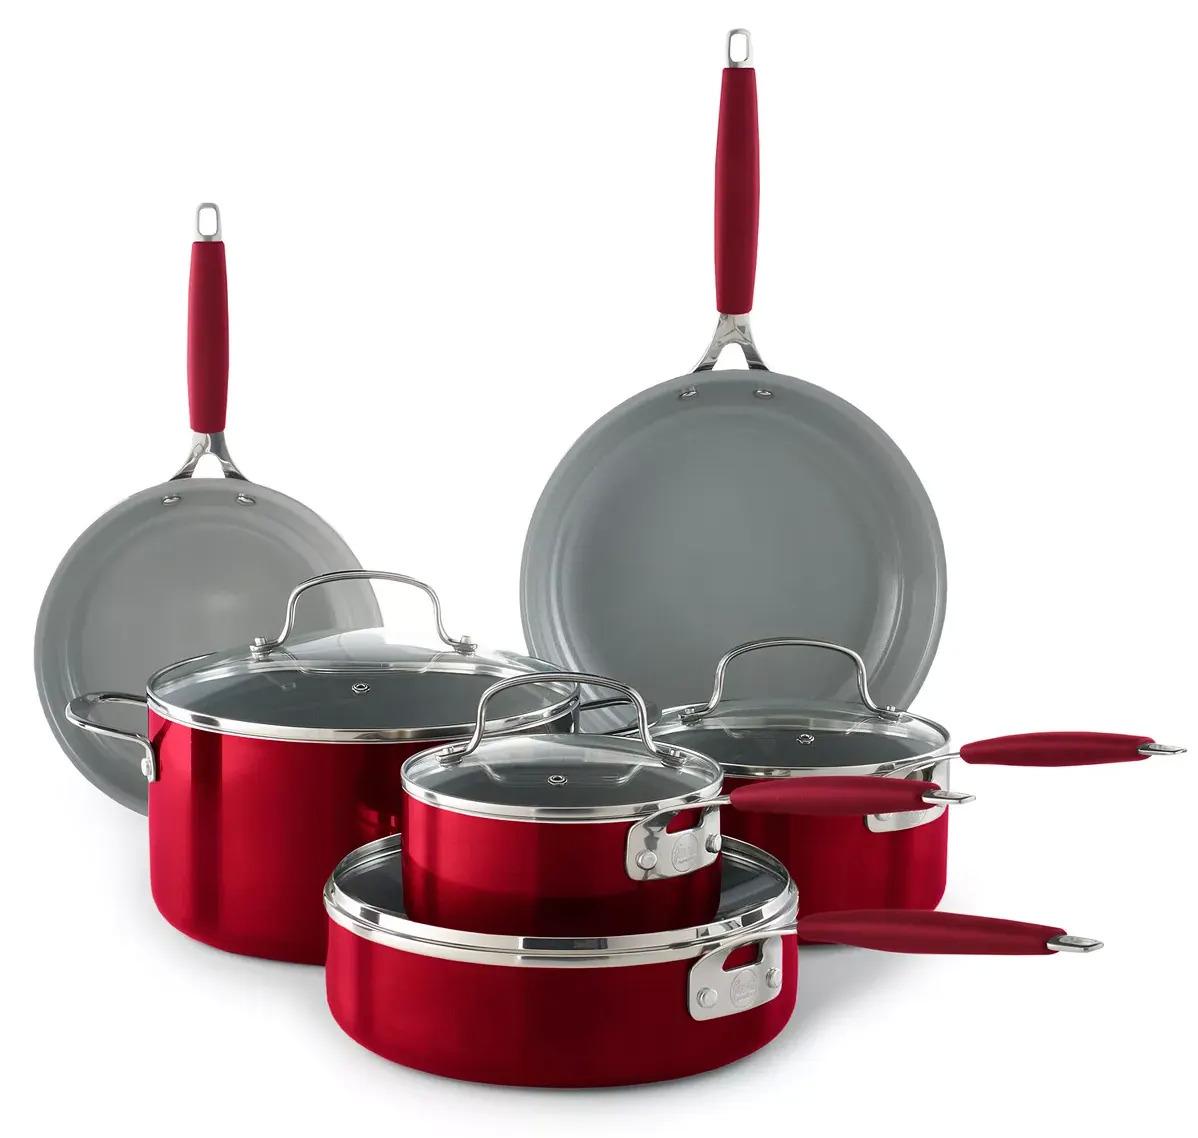 Food Network Nonstick Ceramic Cookware Set with $15 GC for $49.71 Shipped